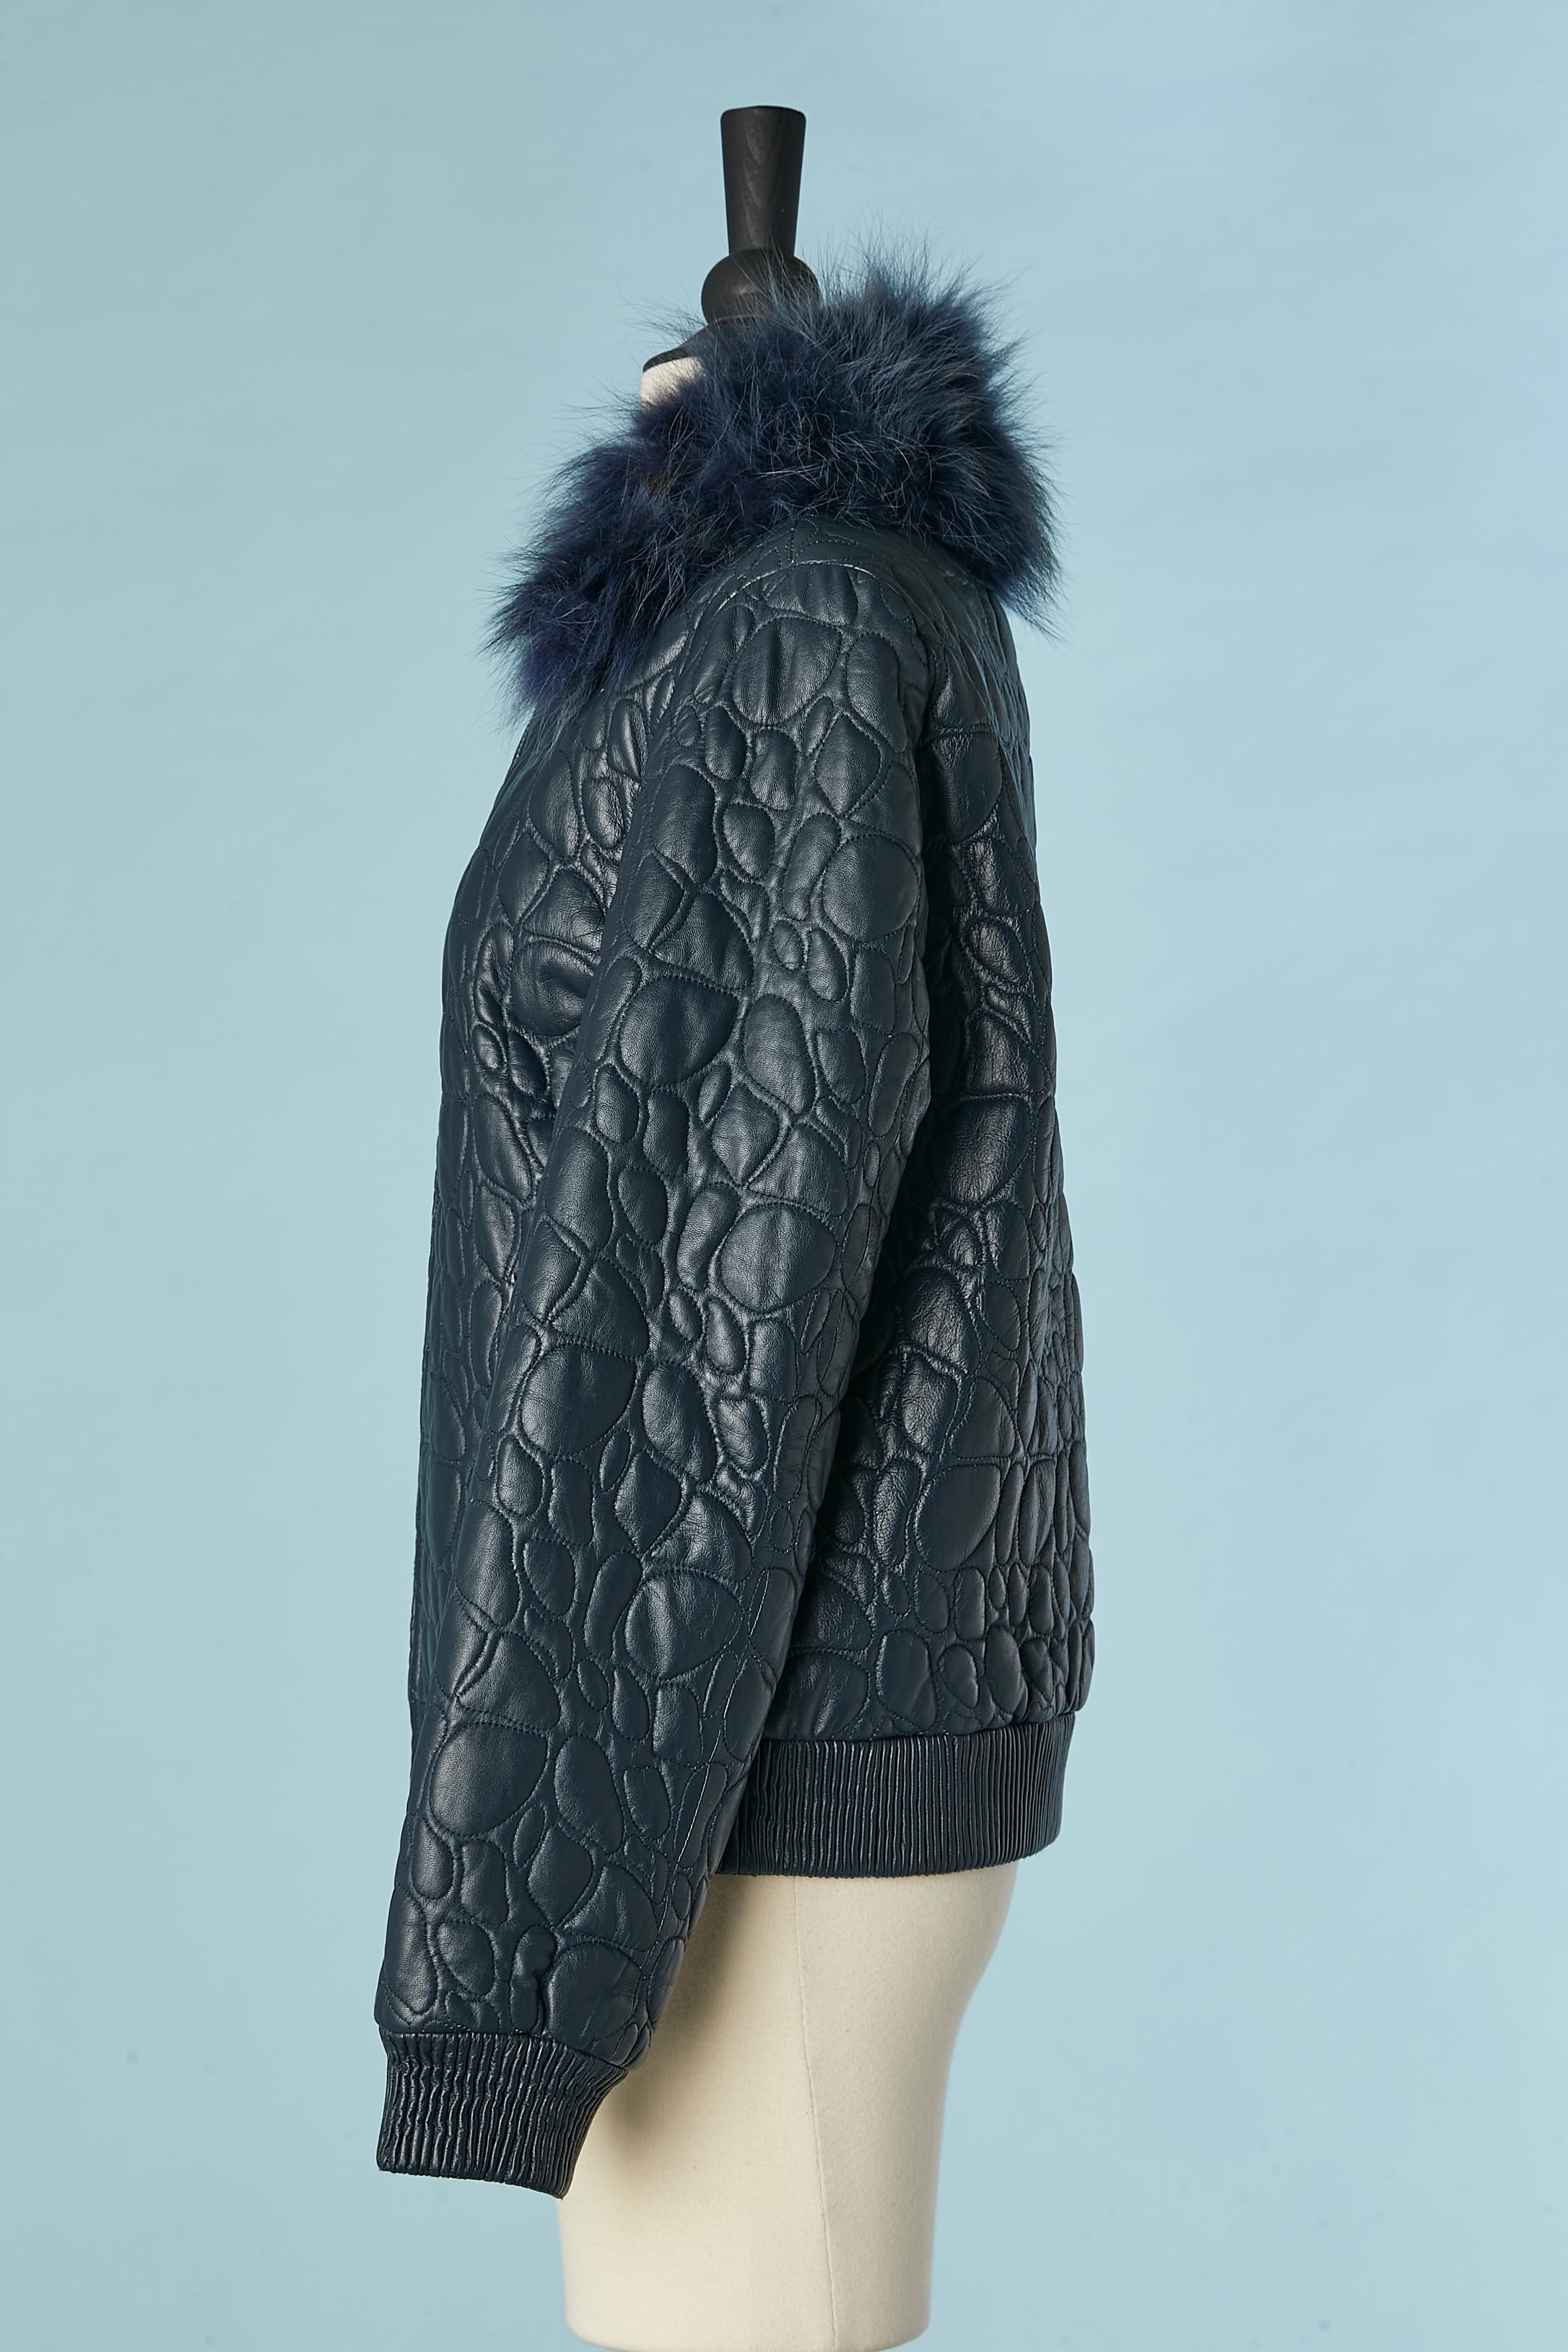 Blue leather top-stitched jacket with detachable fur collar TRU TRUSSARDI  For Sale 1